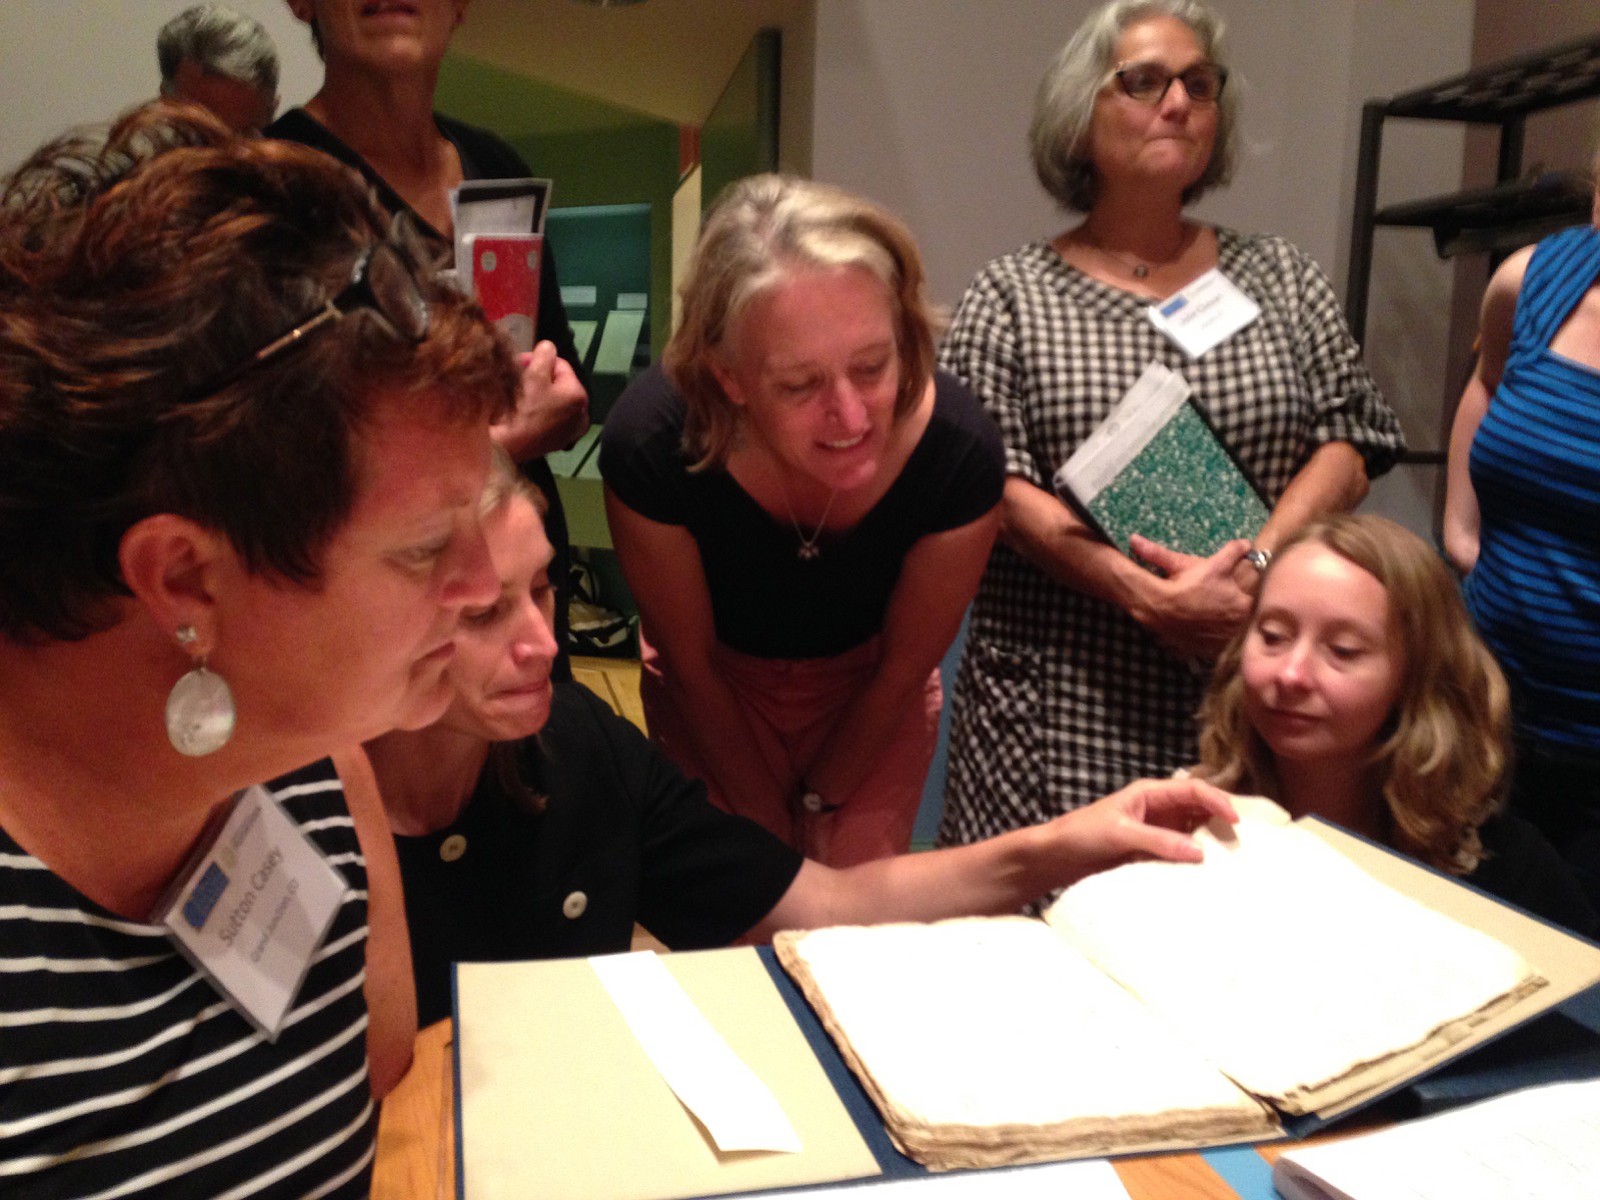 Woodland High School teacher Heather Gordon, center, got to examine a 400-year-old &quot;first folio&quot; in the Rare Books Room at Columbia University during her summer Shakespeare seminar in New York City.